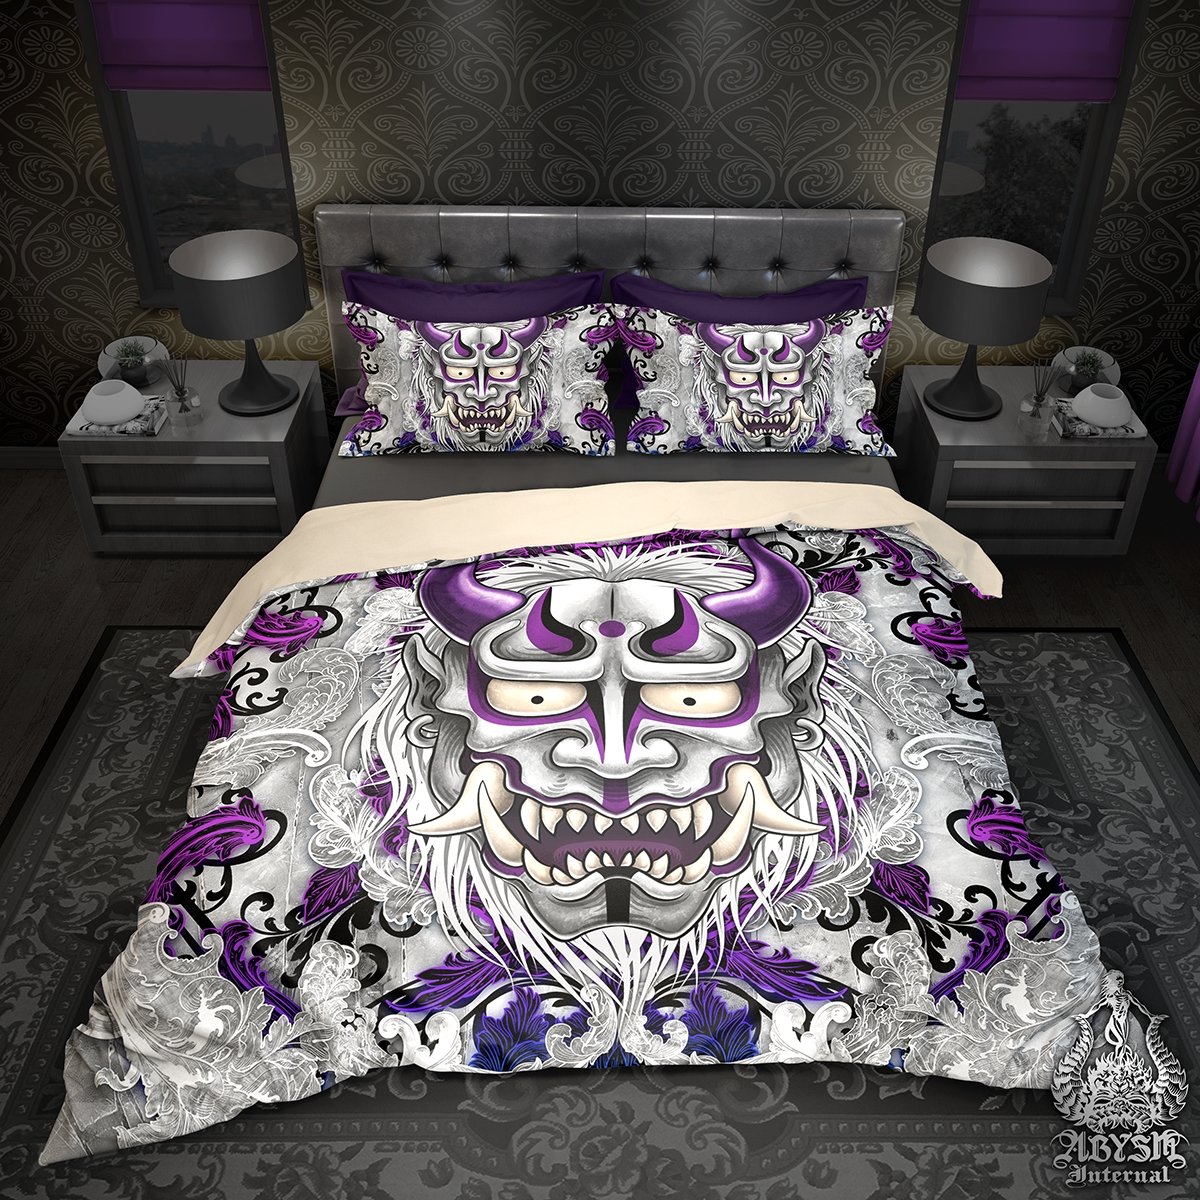 Oni Bedding Set, Comforter and Duvet, Japanese Demon, Pastel Goth Bed Cover and Bedroom Decor, King, Queen and Twin Size - White and Purple - Abysm Internal